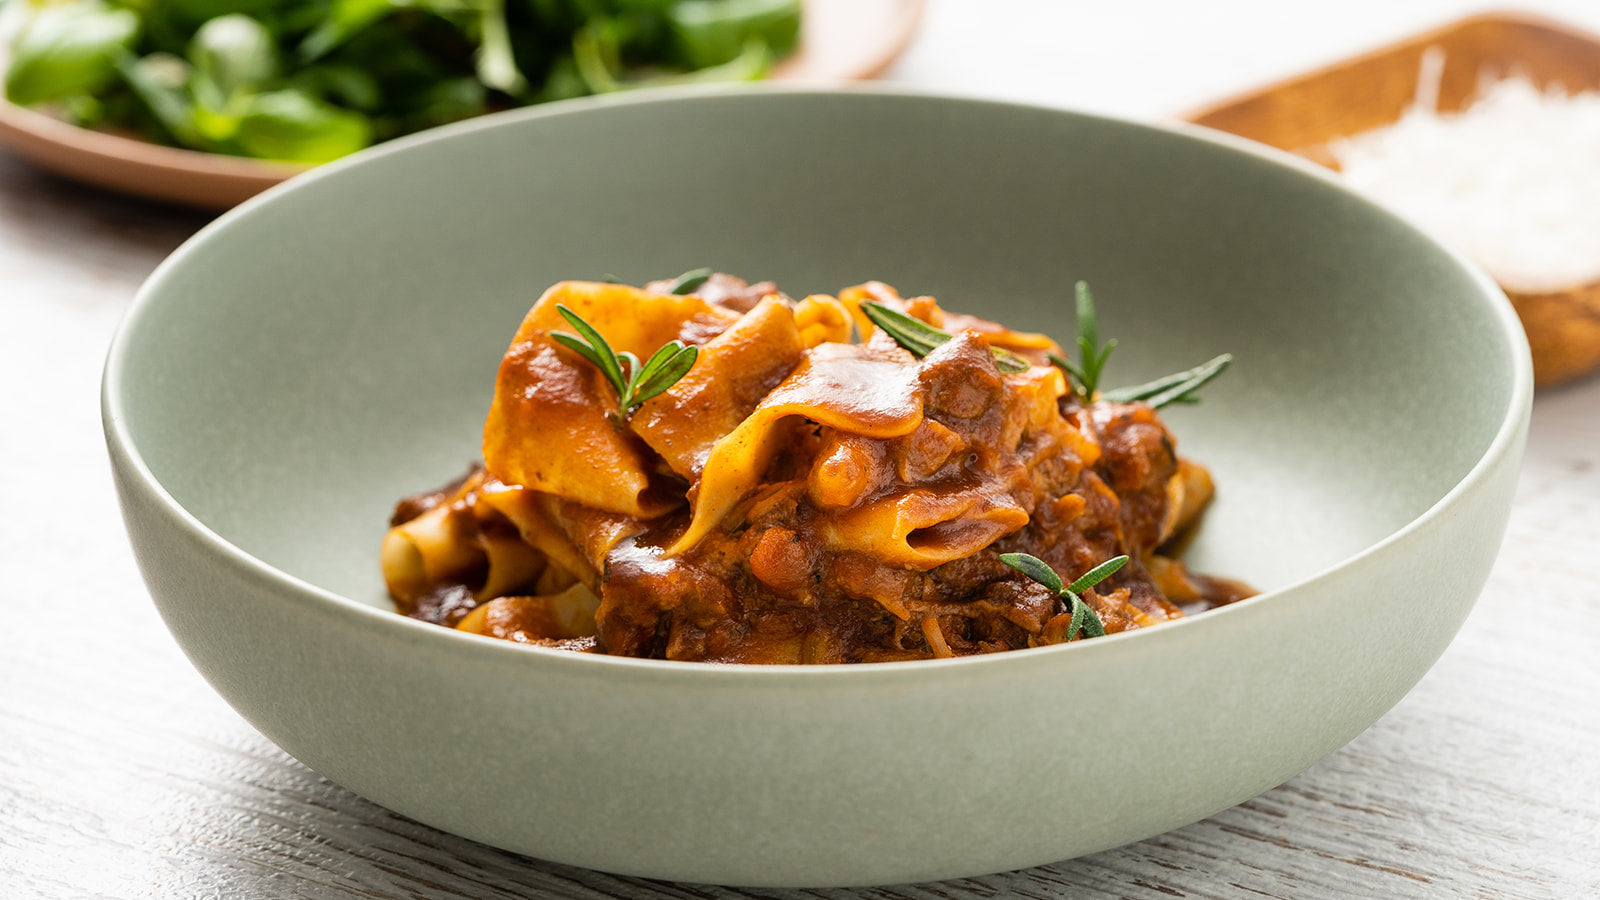 Satisfy your cravings with our 500g Slow Cooked Ragu Sauce, a quick and delicious meal option for 2-3.Experience the convenience of our 500g Slow Cooked Ragu Sauce, perfect for serving 2-3 over fresh pasta.